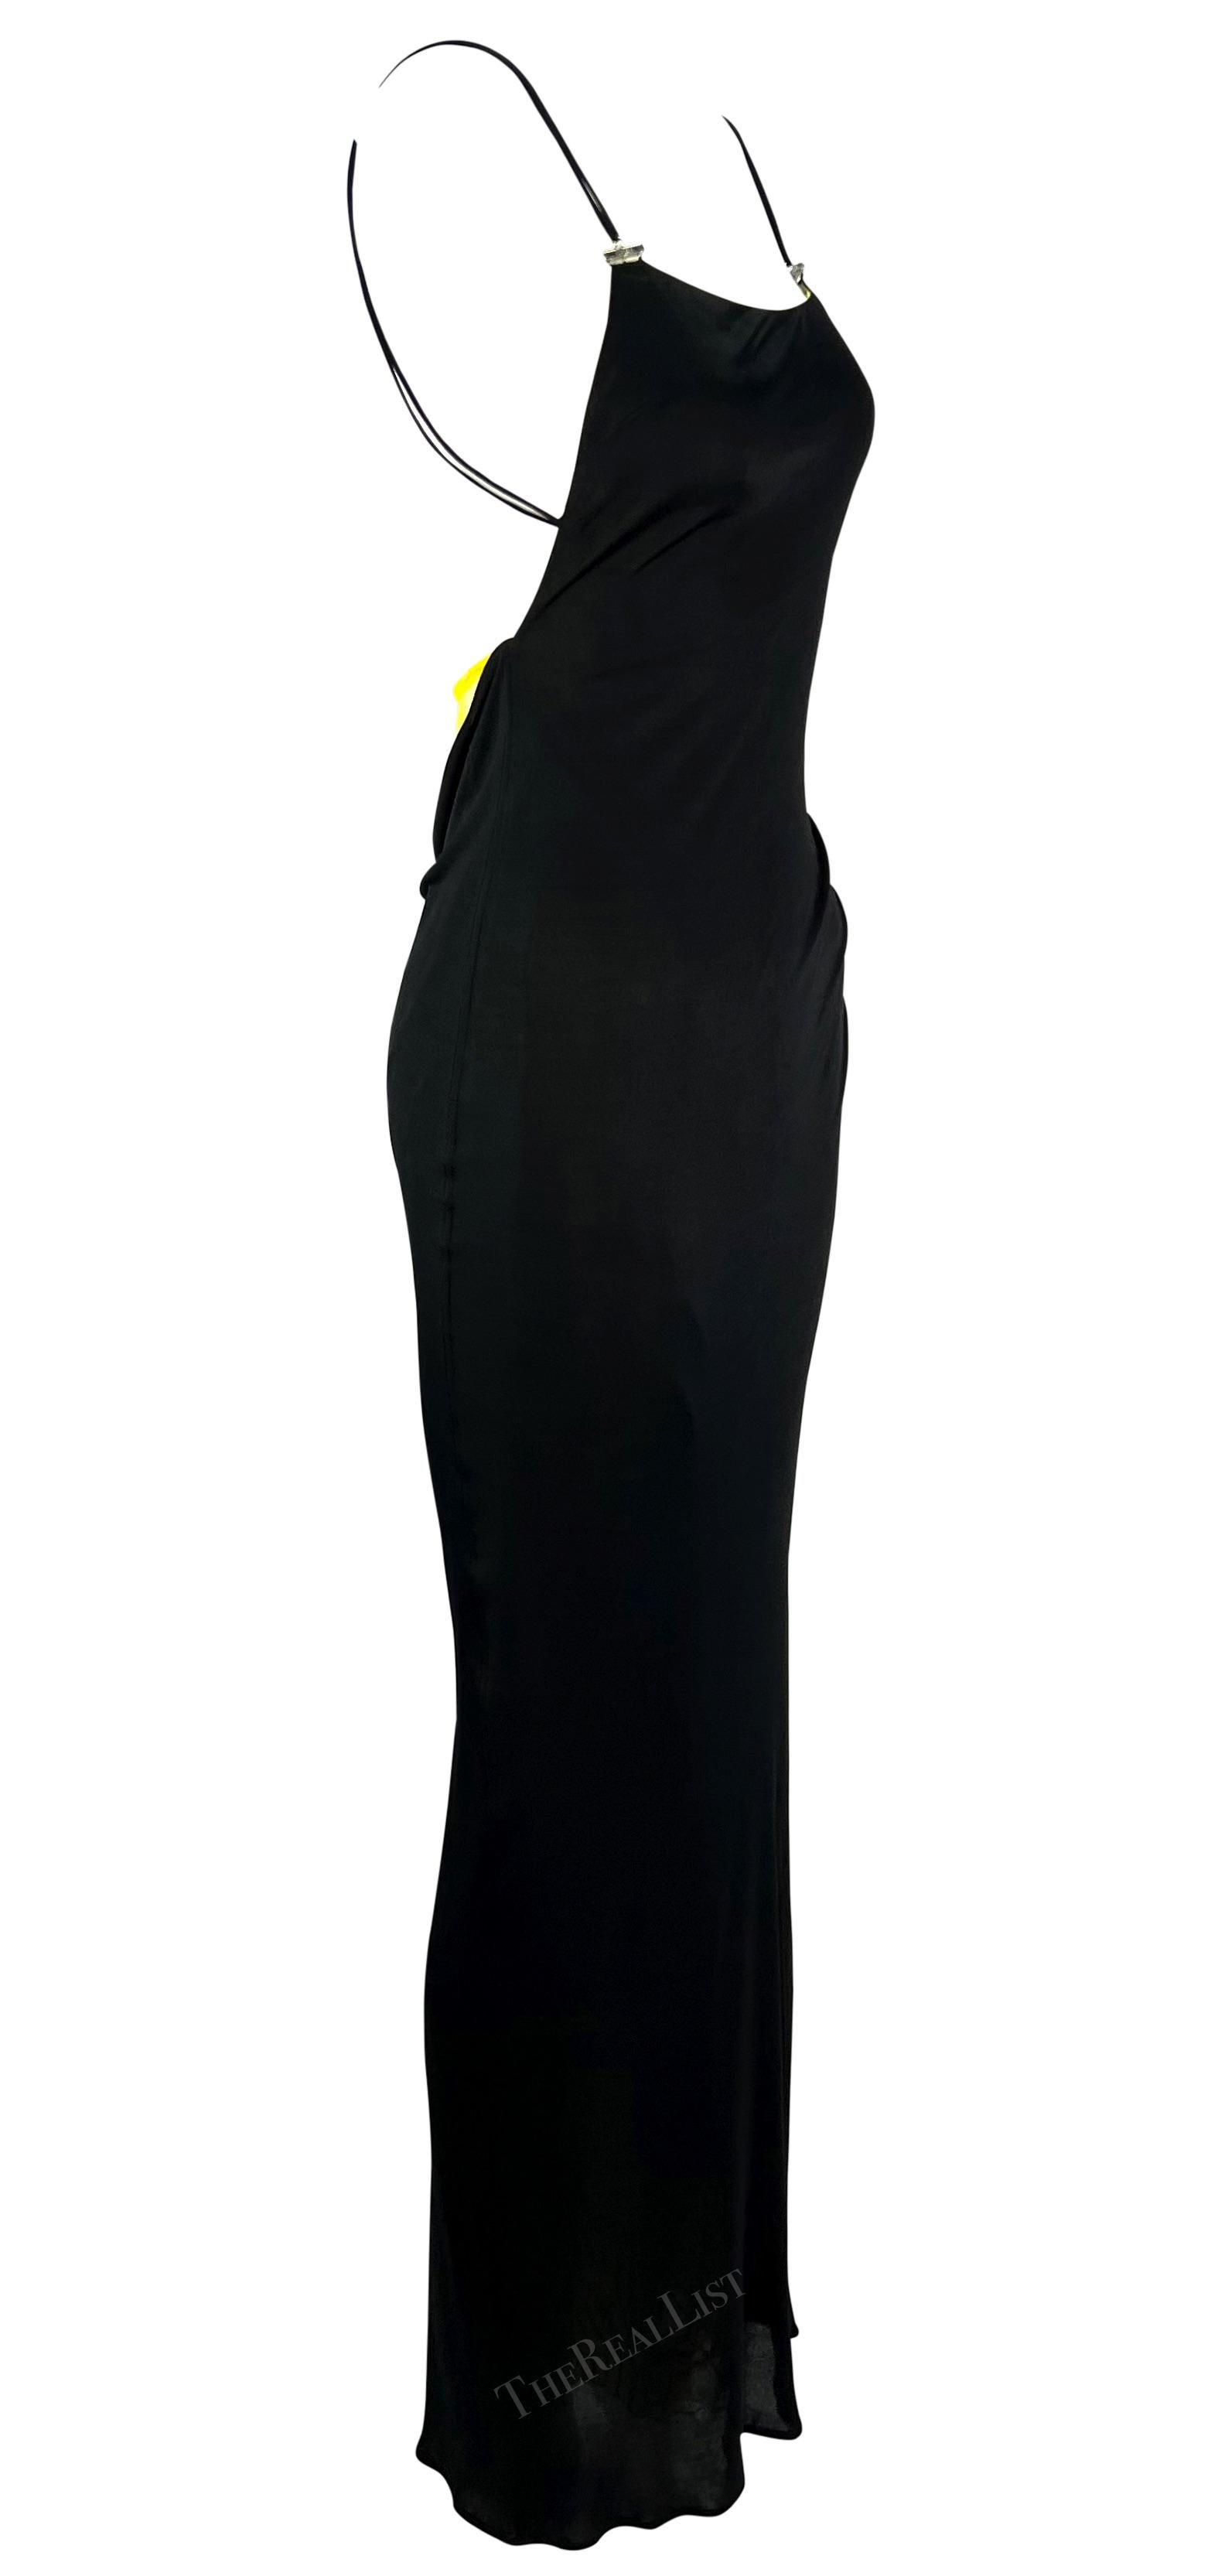 S/S 1999 Gianni Versace by Donatella Ruched Black High-Slit Yellow Mesh Gown For Sale 2